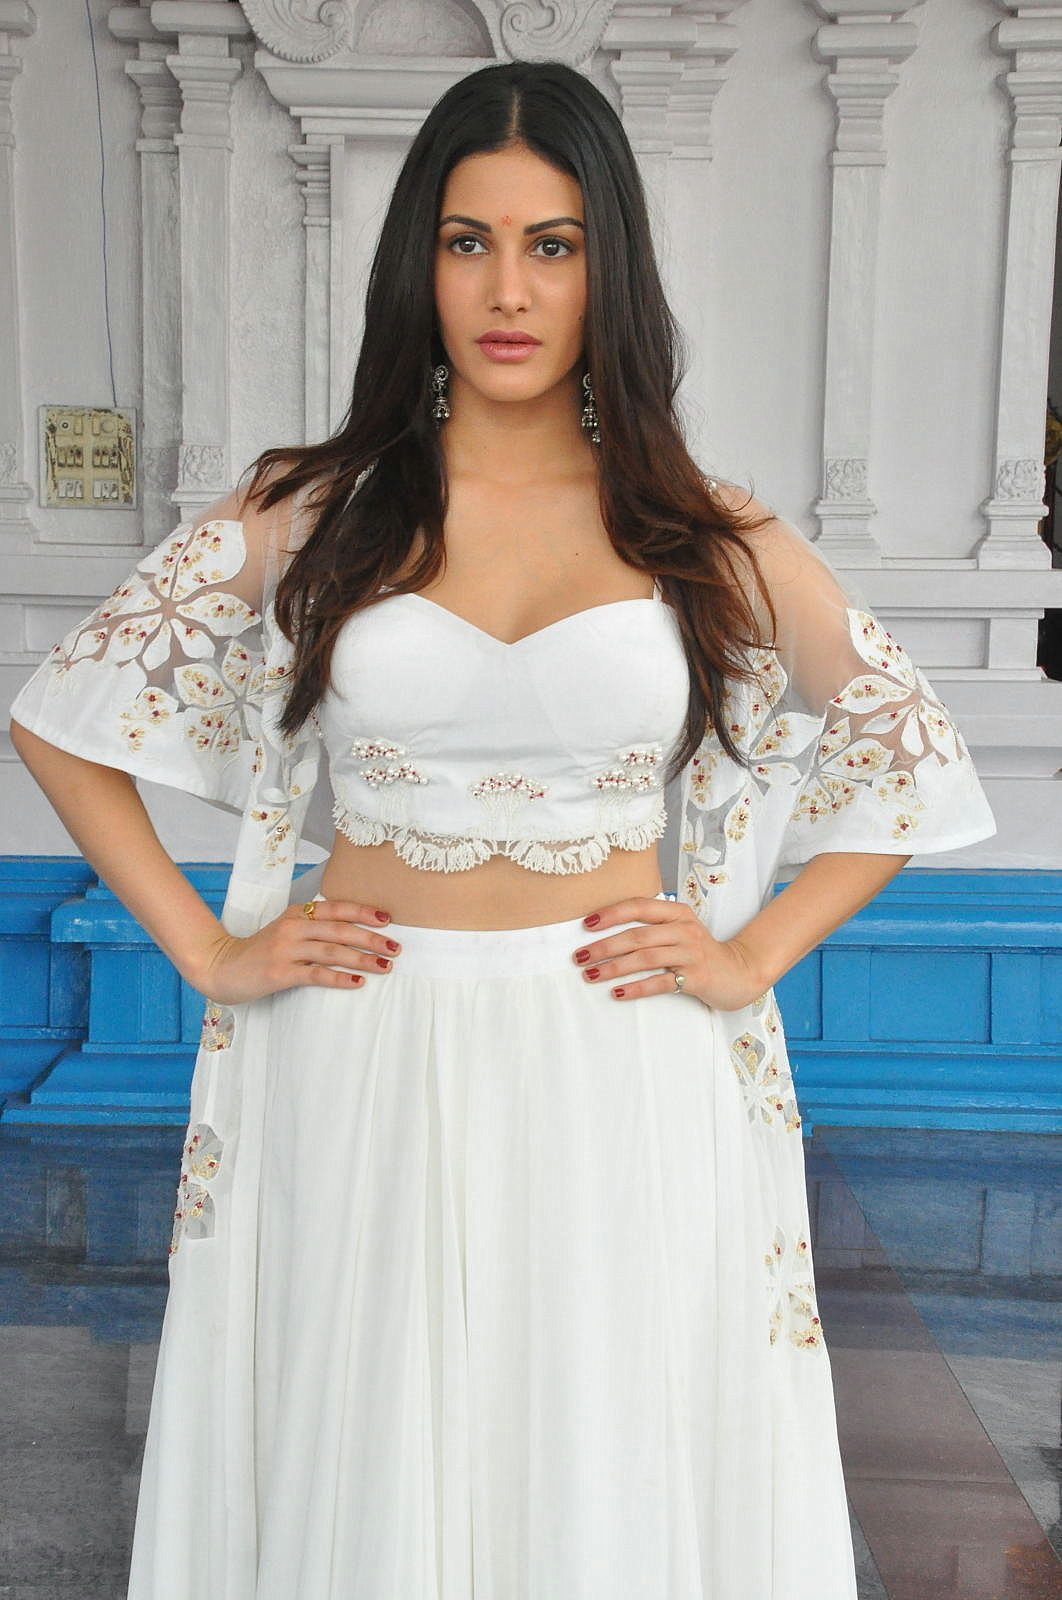 Amyra Dastur Looks Super Hot in a Revealing White Dress At Anandi Indira Production LLP Production no 1 Opening Event in Hyderabad